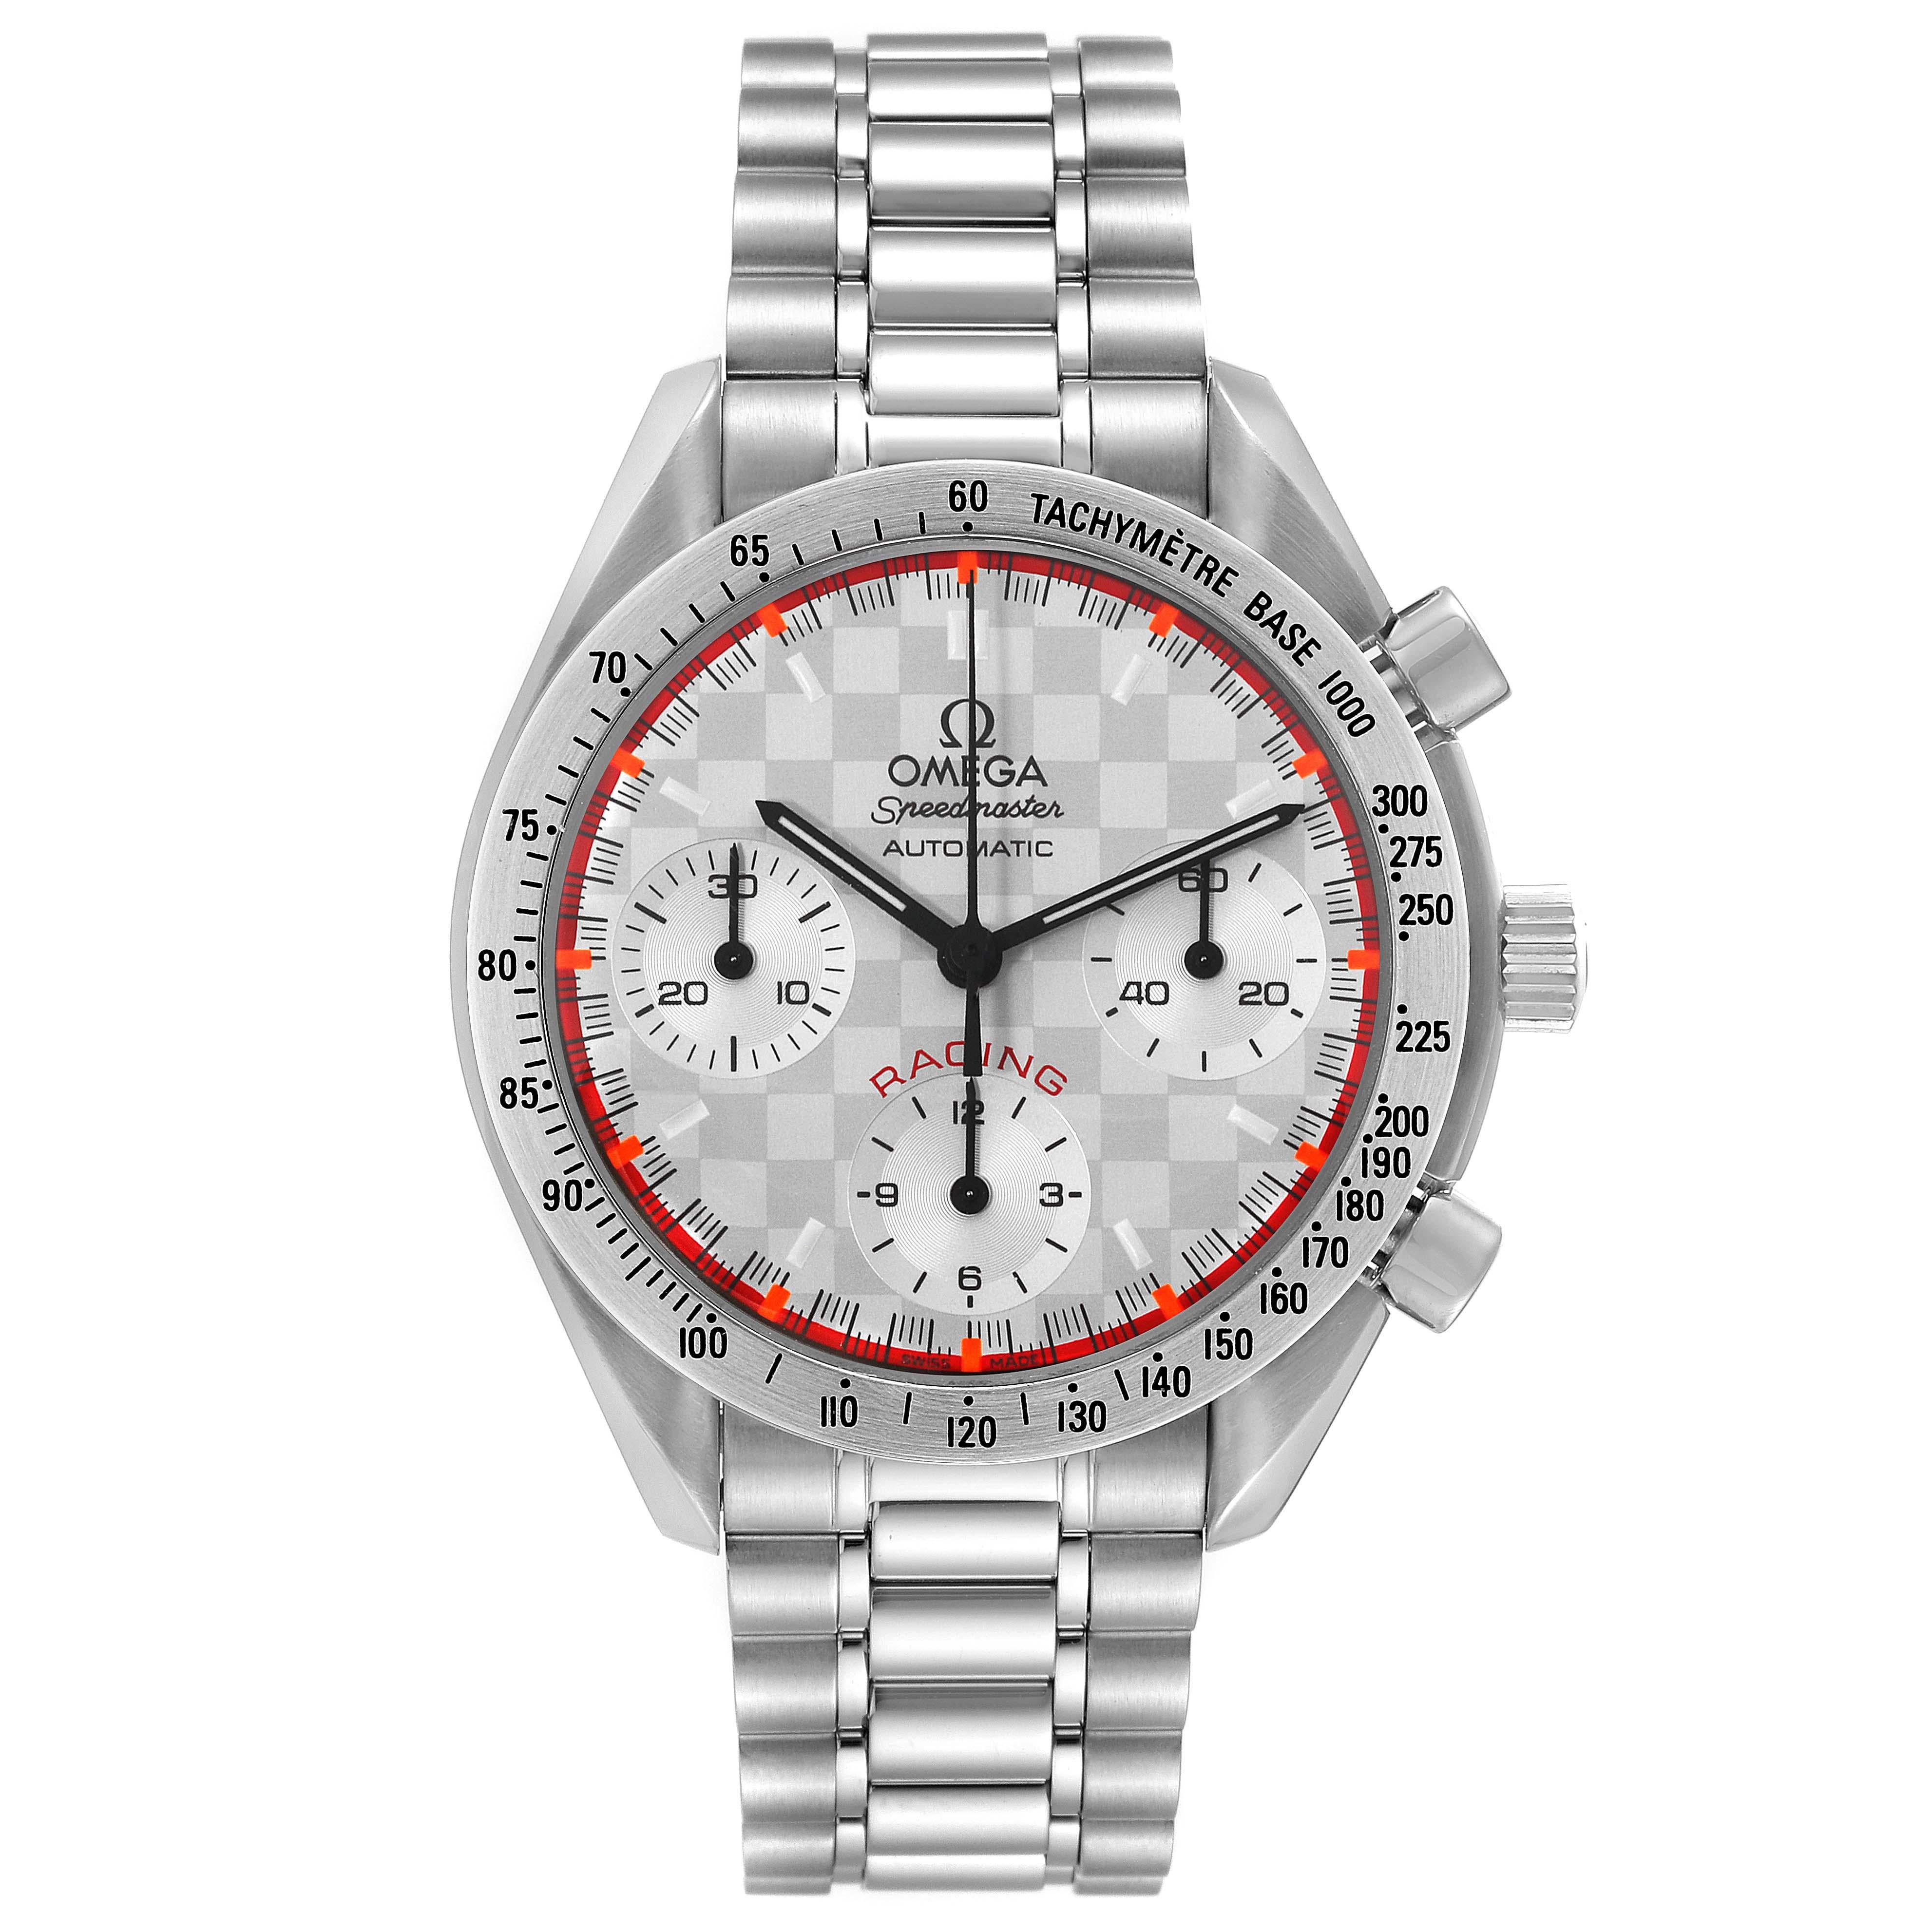 Omega Speedmaster Schumacher Racing Limited Edition Steel Mens Watch 3517.30.00. Automatic self-winding movement. Caliber 3220. Stainless steel round case 39 mm in diameter. Stainless steel bezel with tachymeter function. Hesalite crystal. Silver